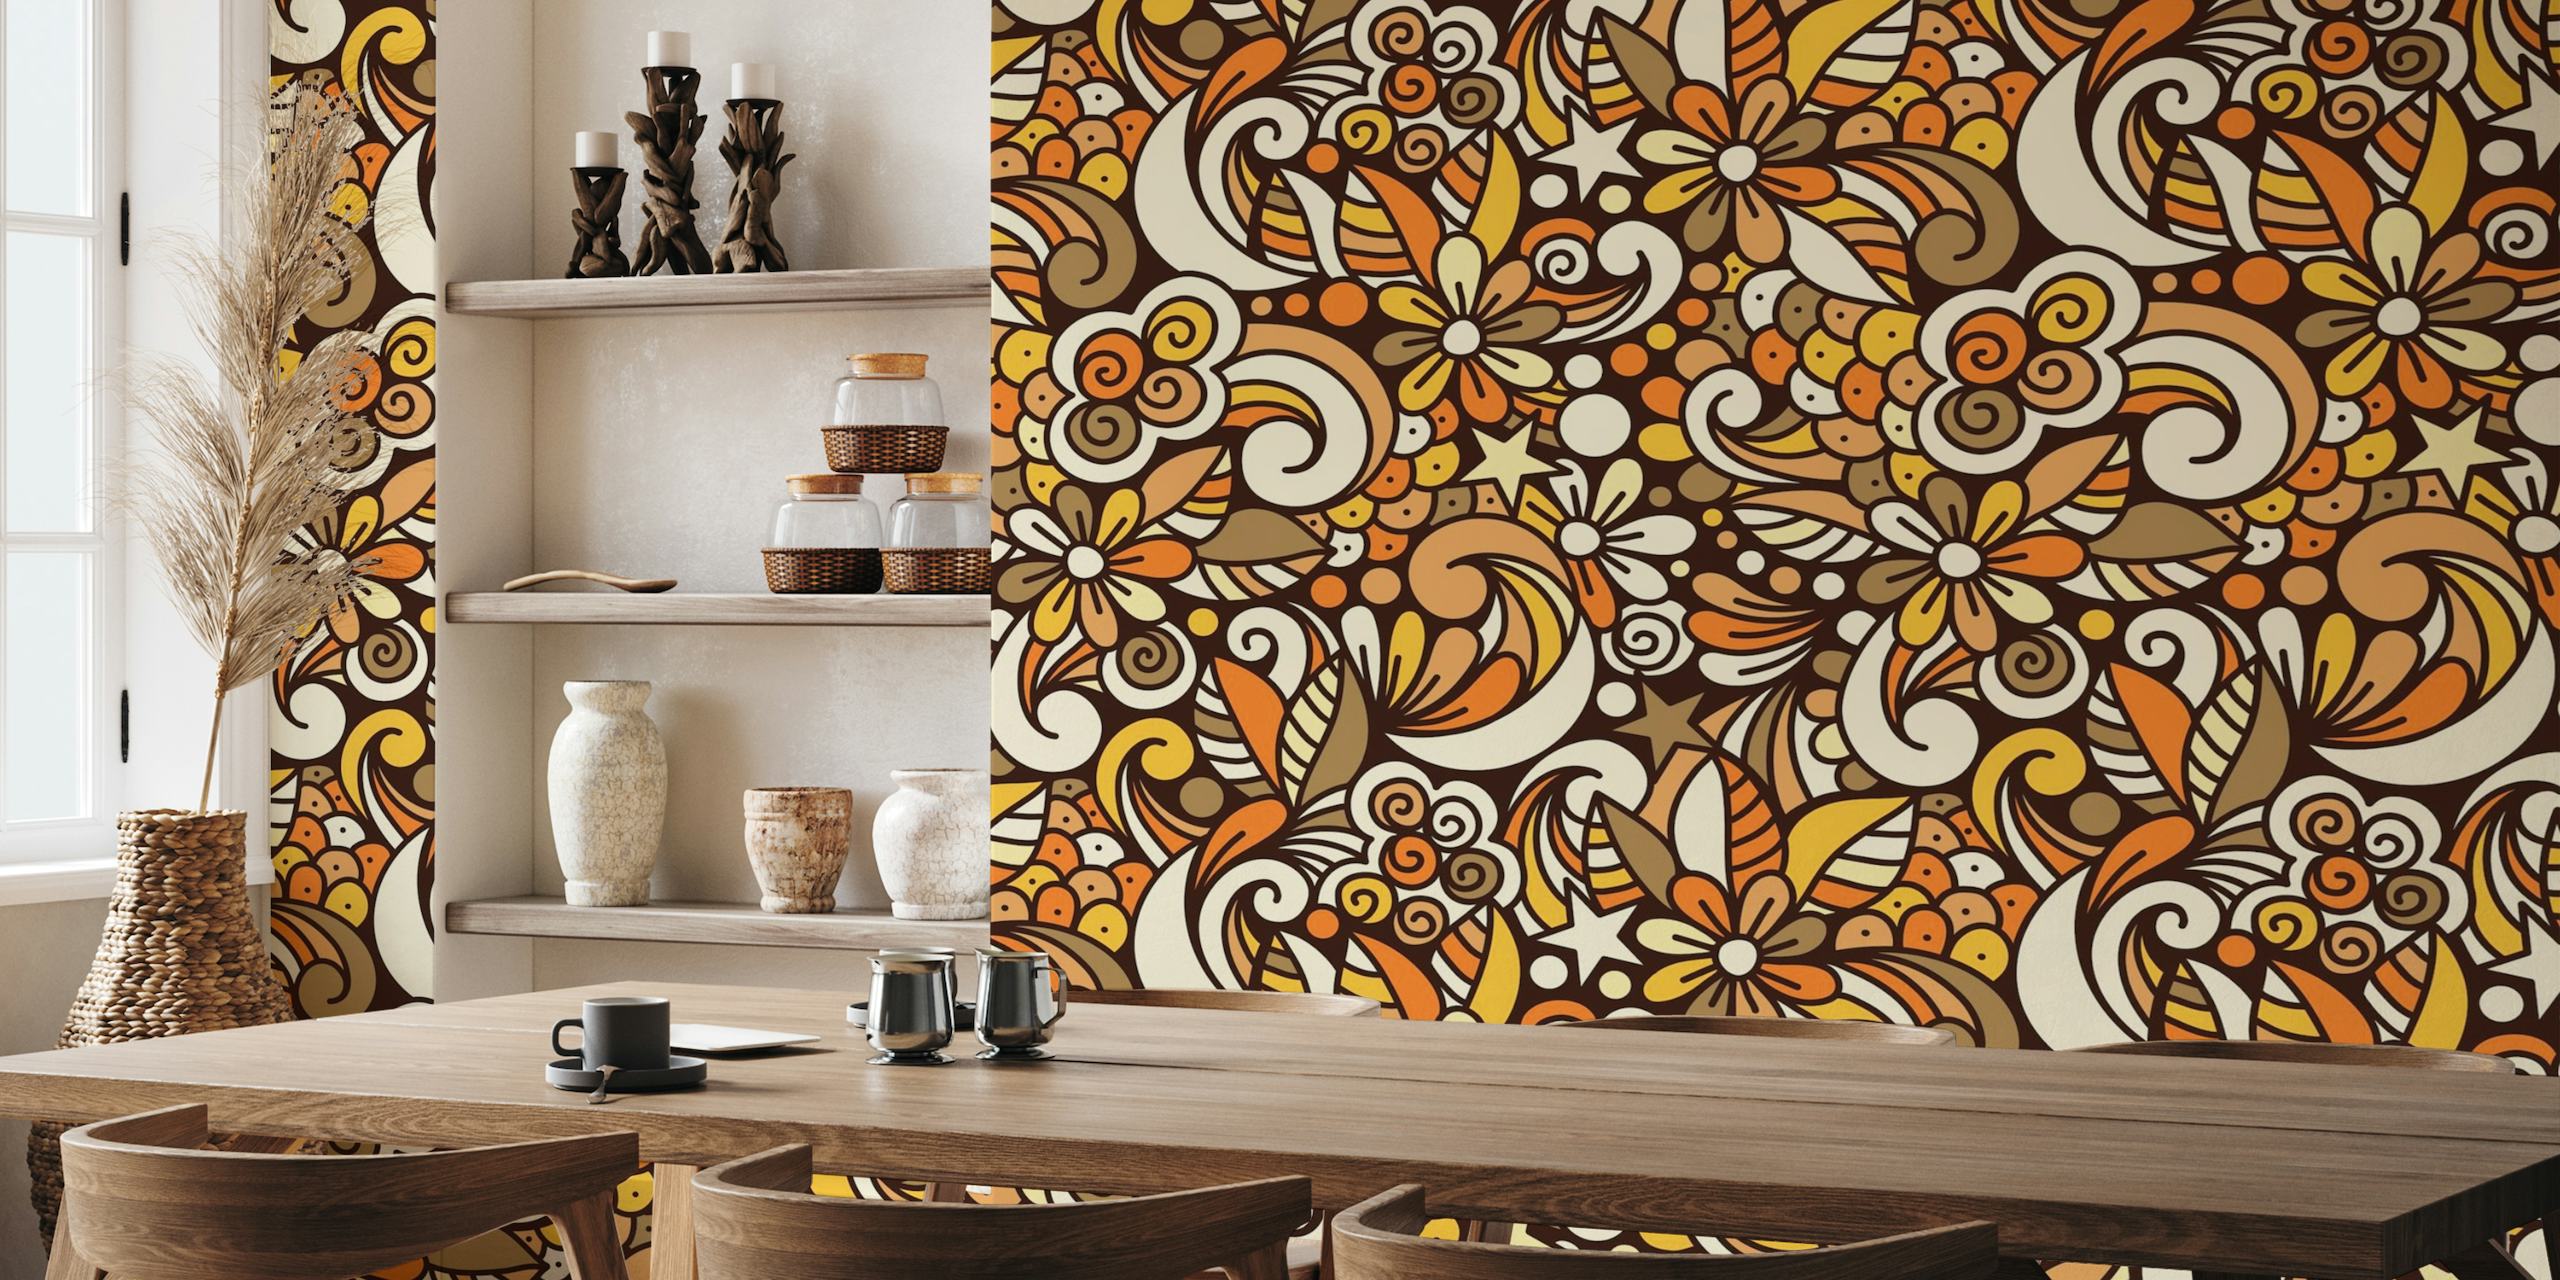 Groovy floral retro doodle, yellow - brown (2753G) behang